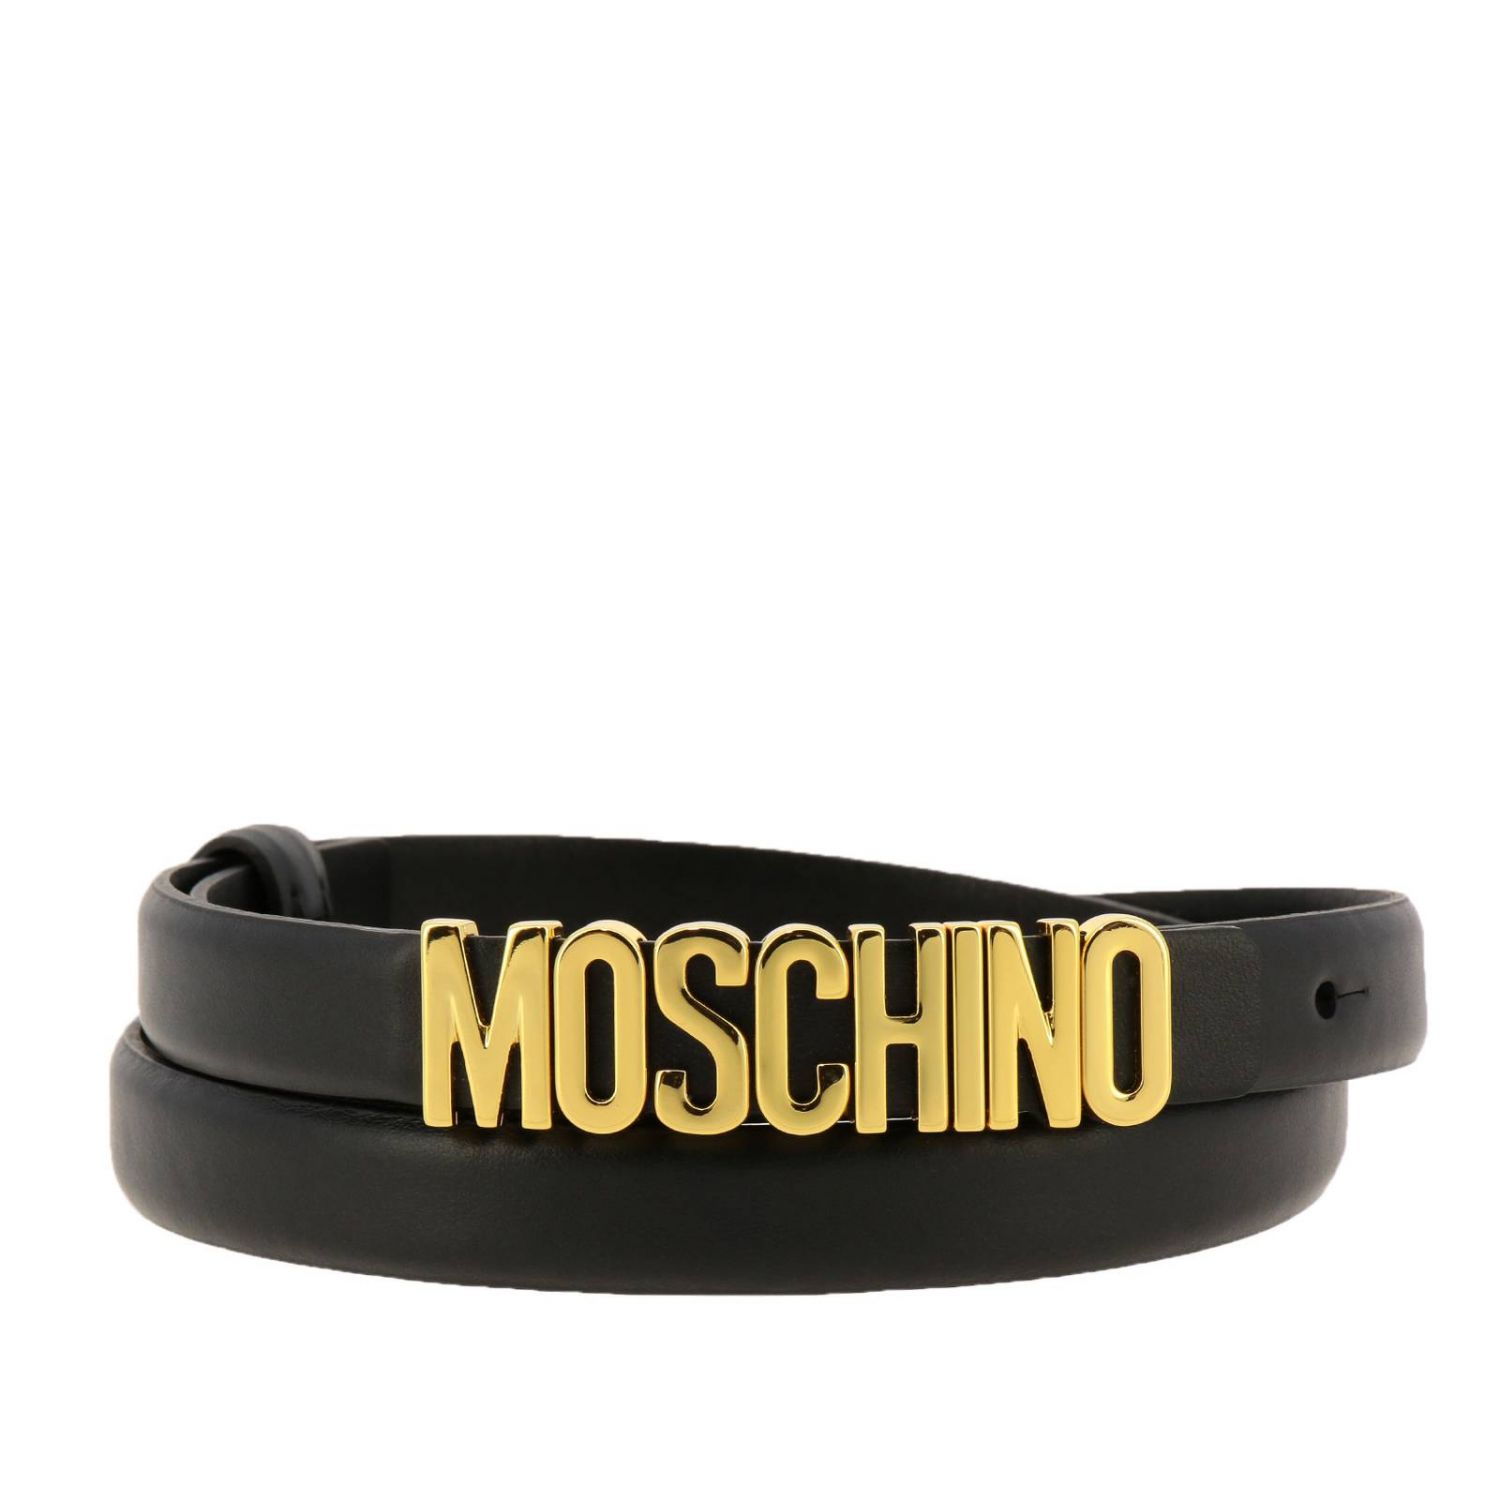 Boutique Moschino Outlet: belt for woman - Black | Boutique Moschino ...